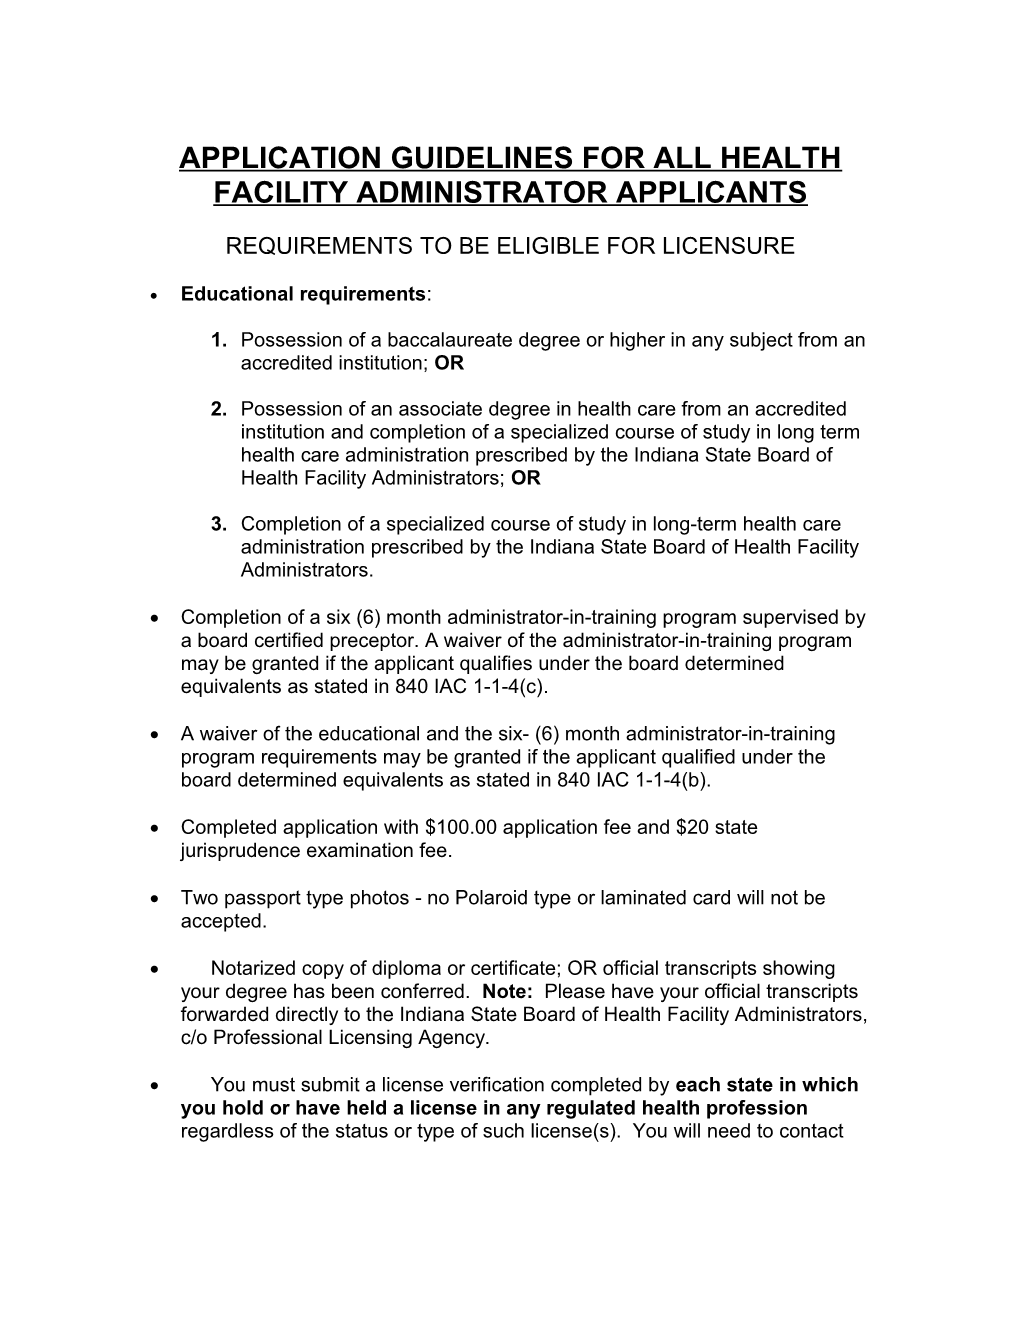 Application Guidelines for All Healthfacility Administrator Applicants